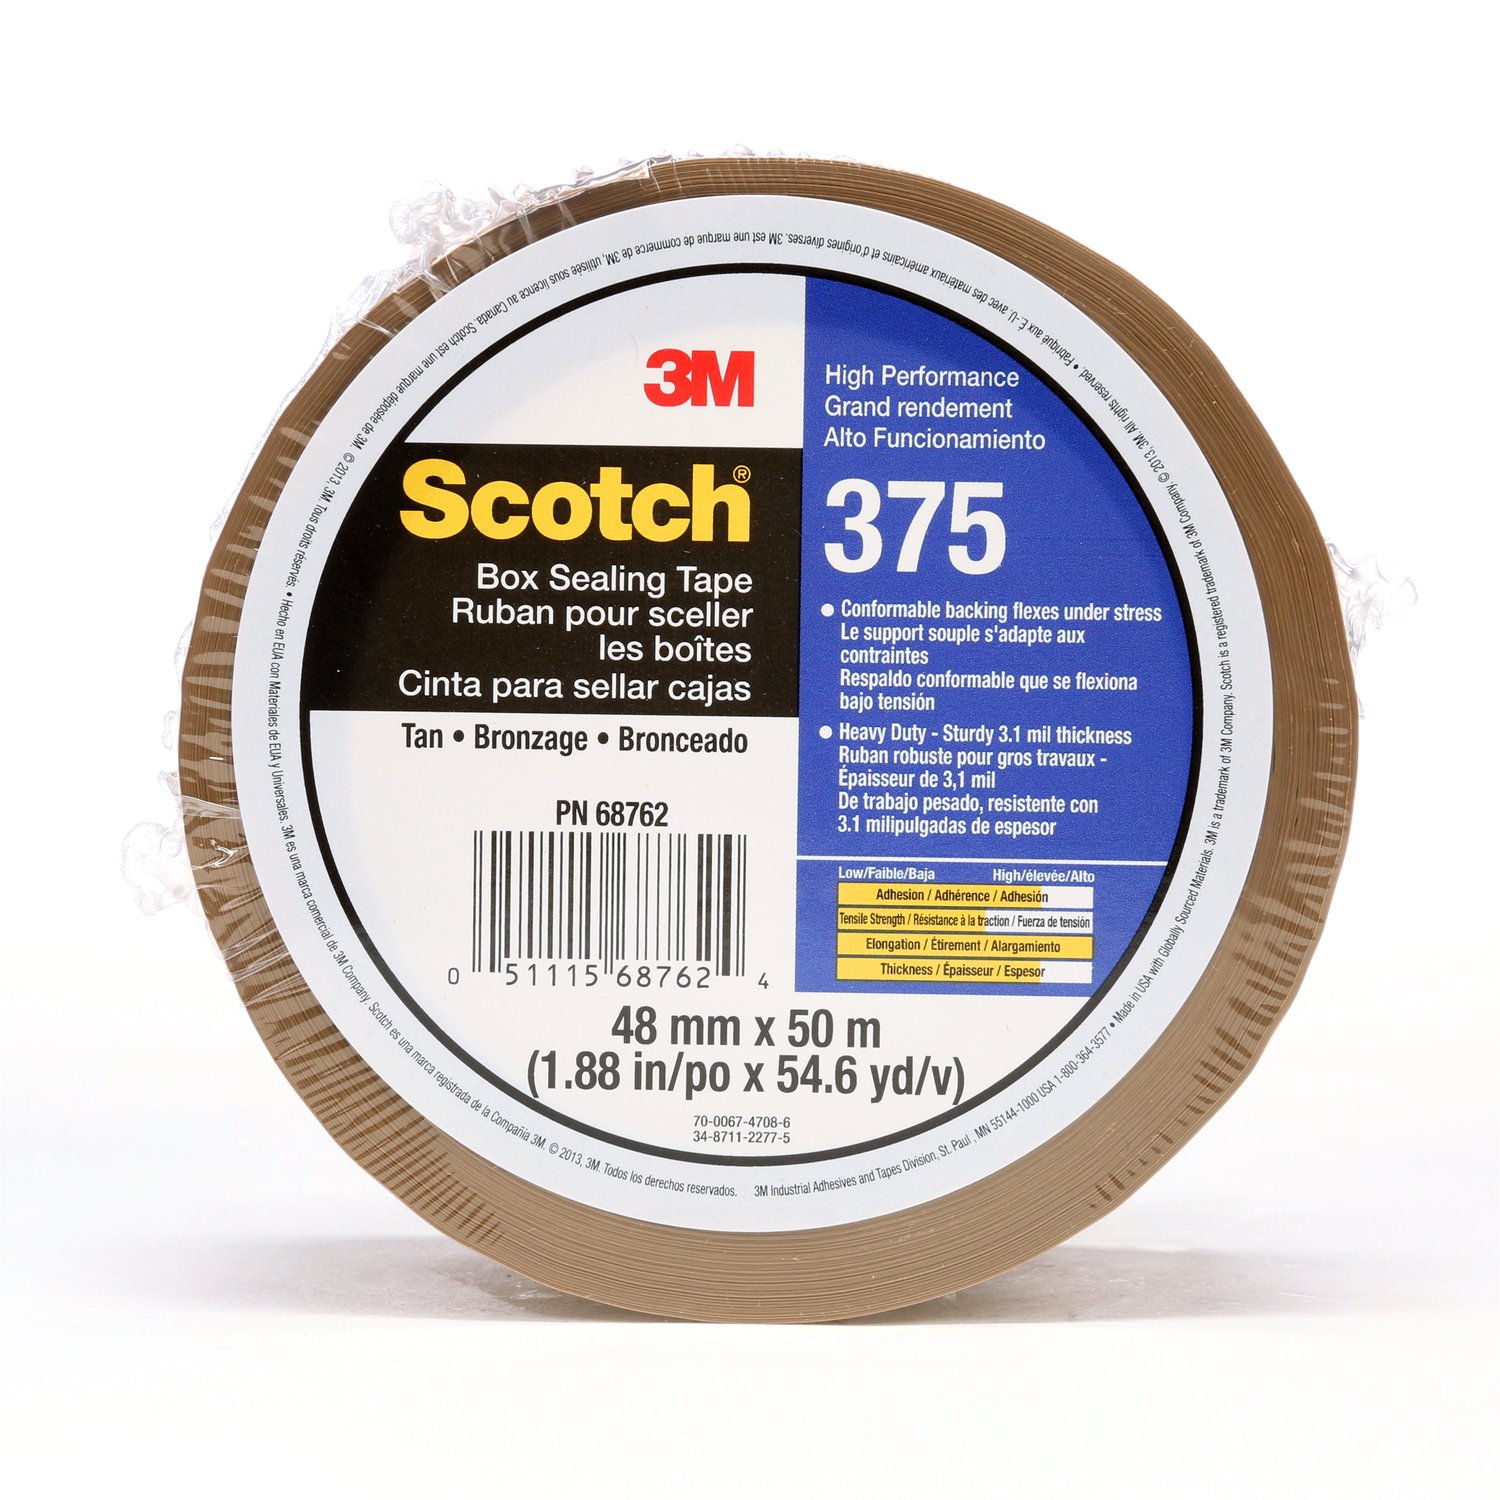 7010374960 - Scotch Box Sealing Tape 375, Tan, 48 mm x 50 m, 36/Case, Individually
Wrapped Conveniently Packaged